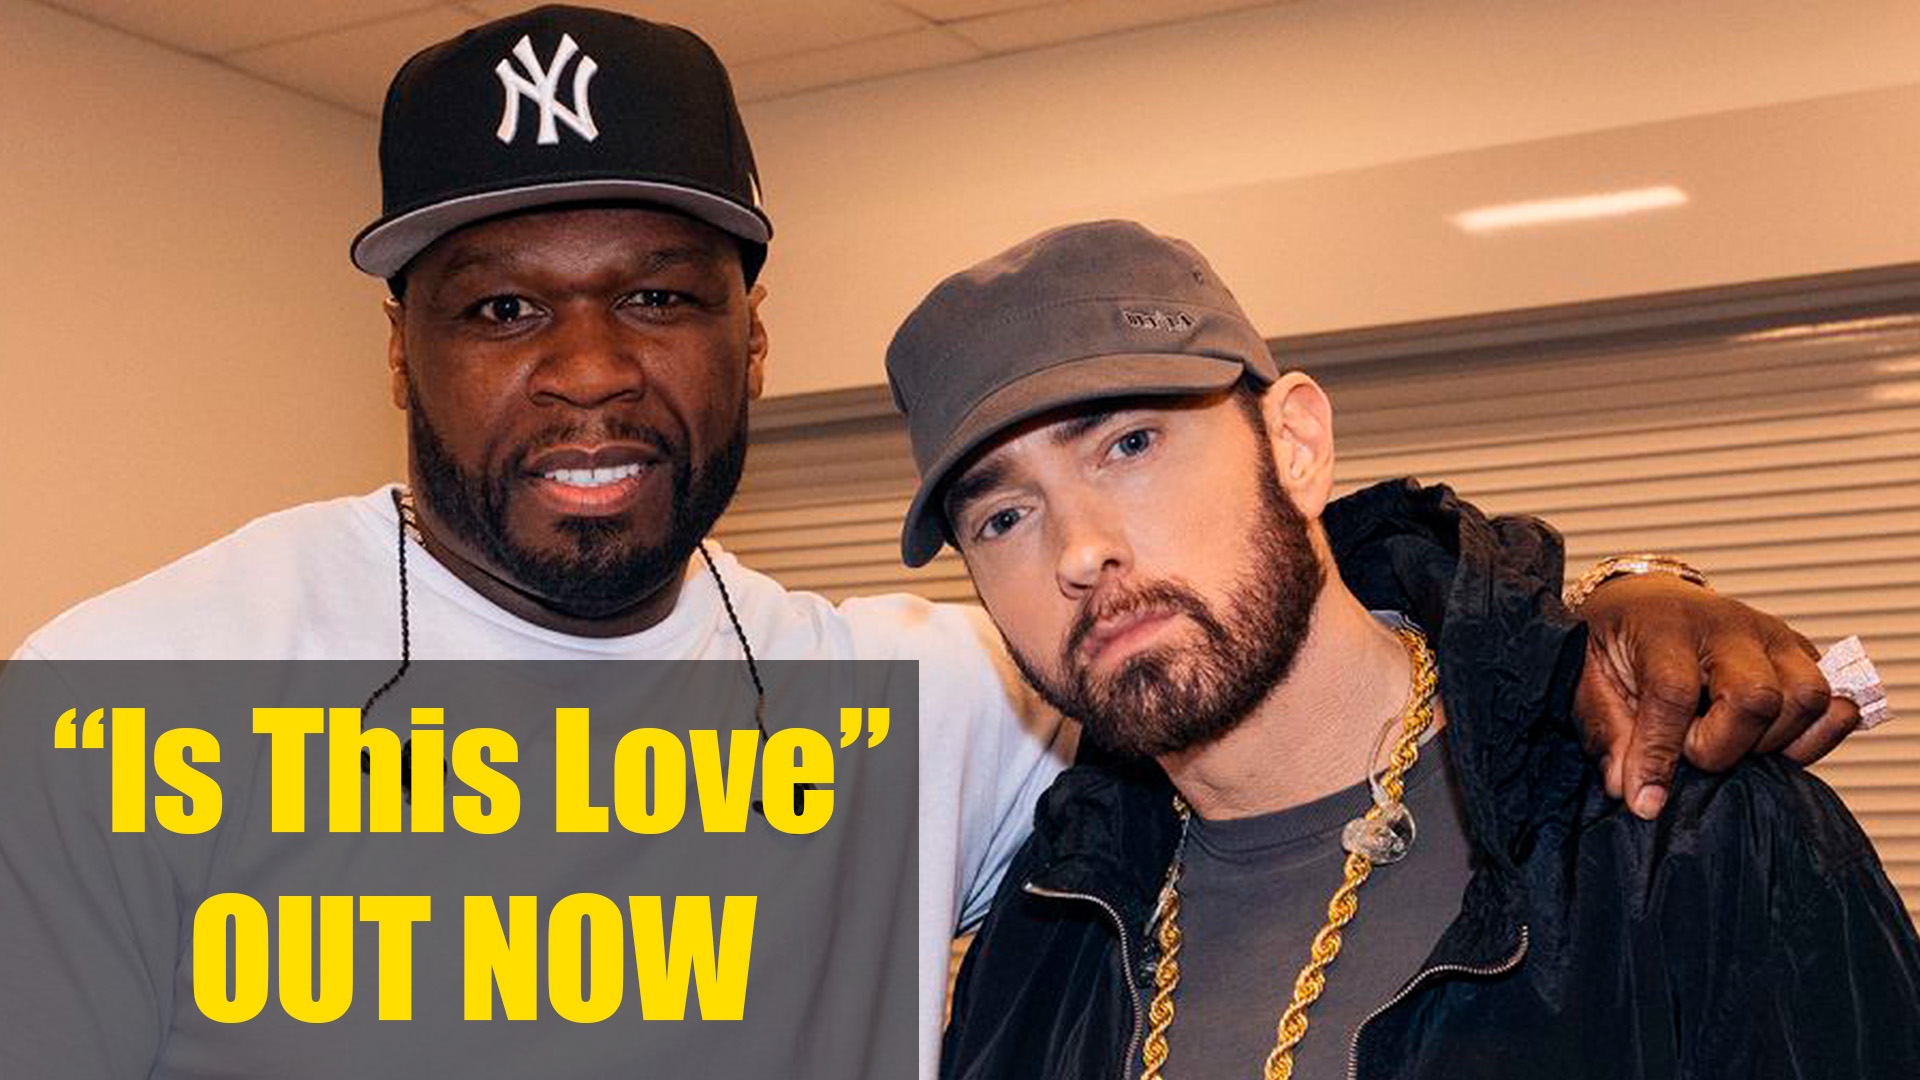 New Song: Eminem ft. 50 Cent – “Is This Love” Is Out Now